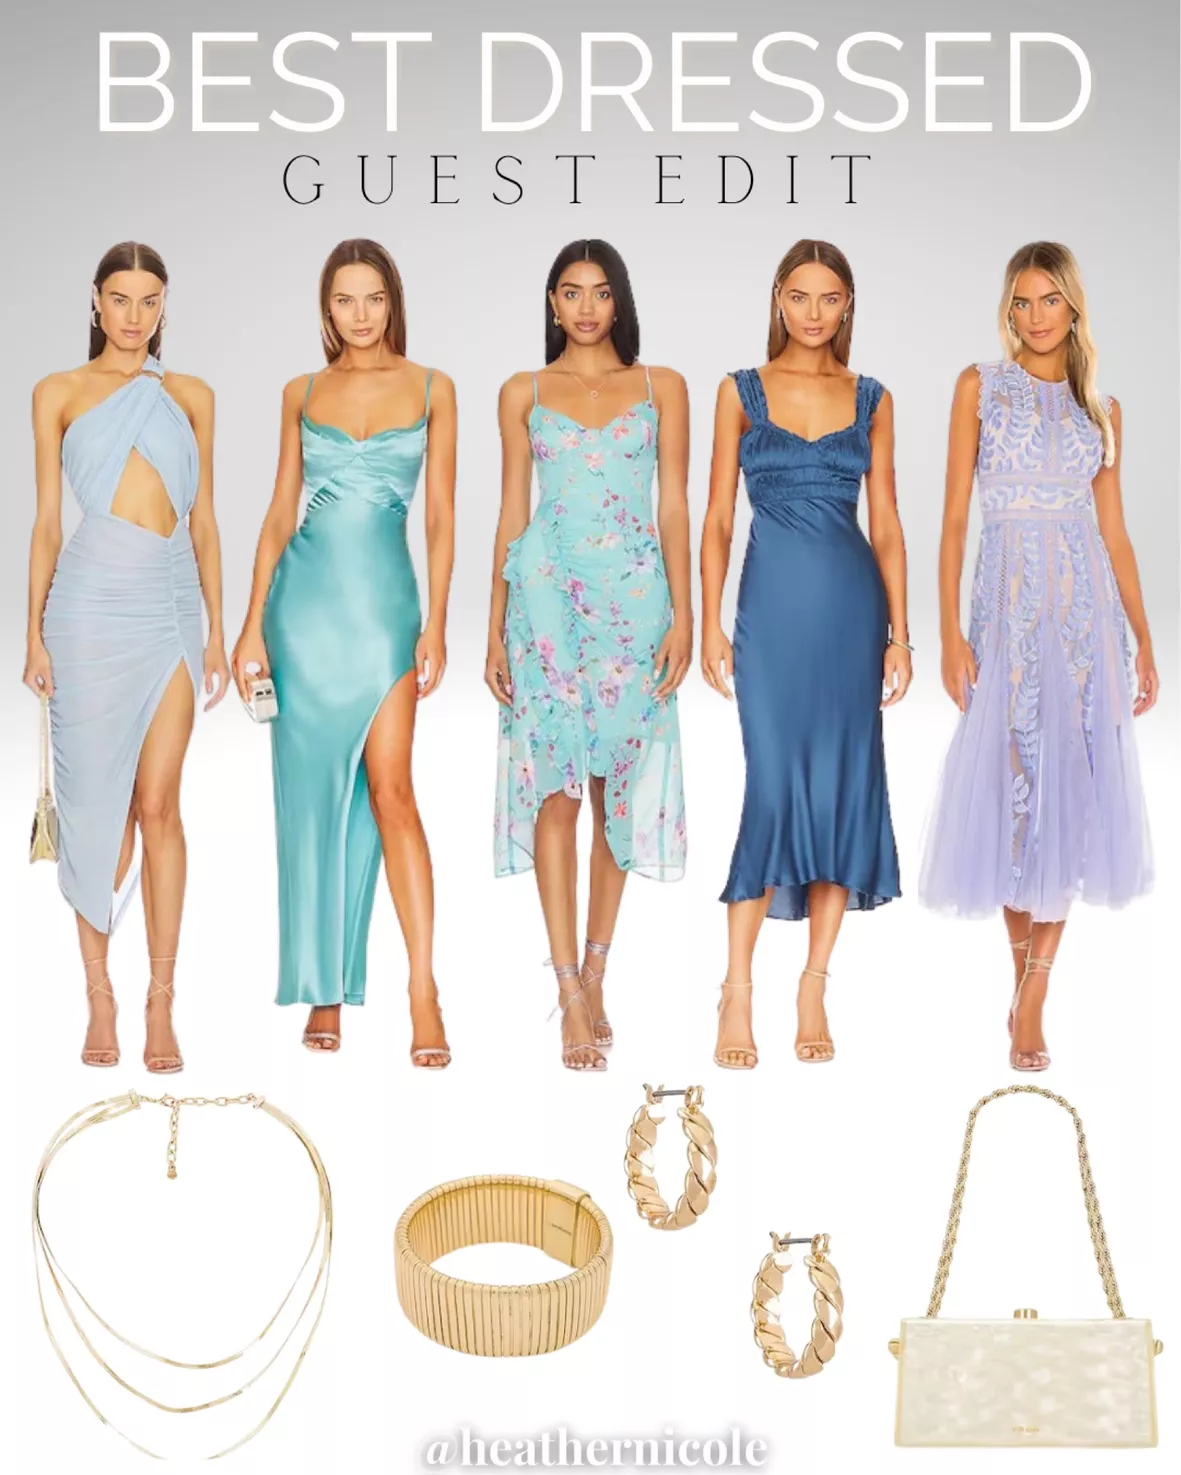 Wedding Guest Dresses, Wedding Guest Outfits